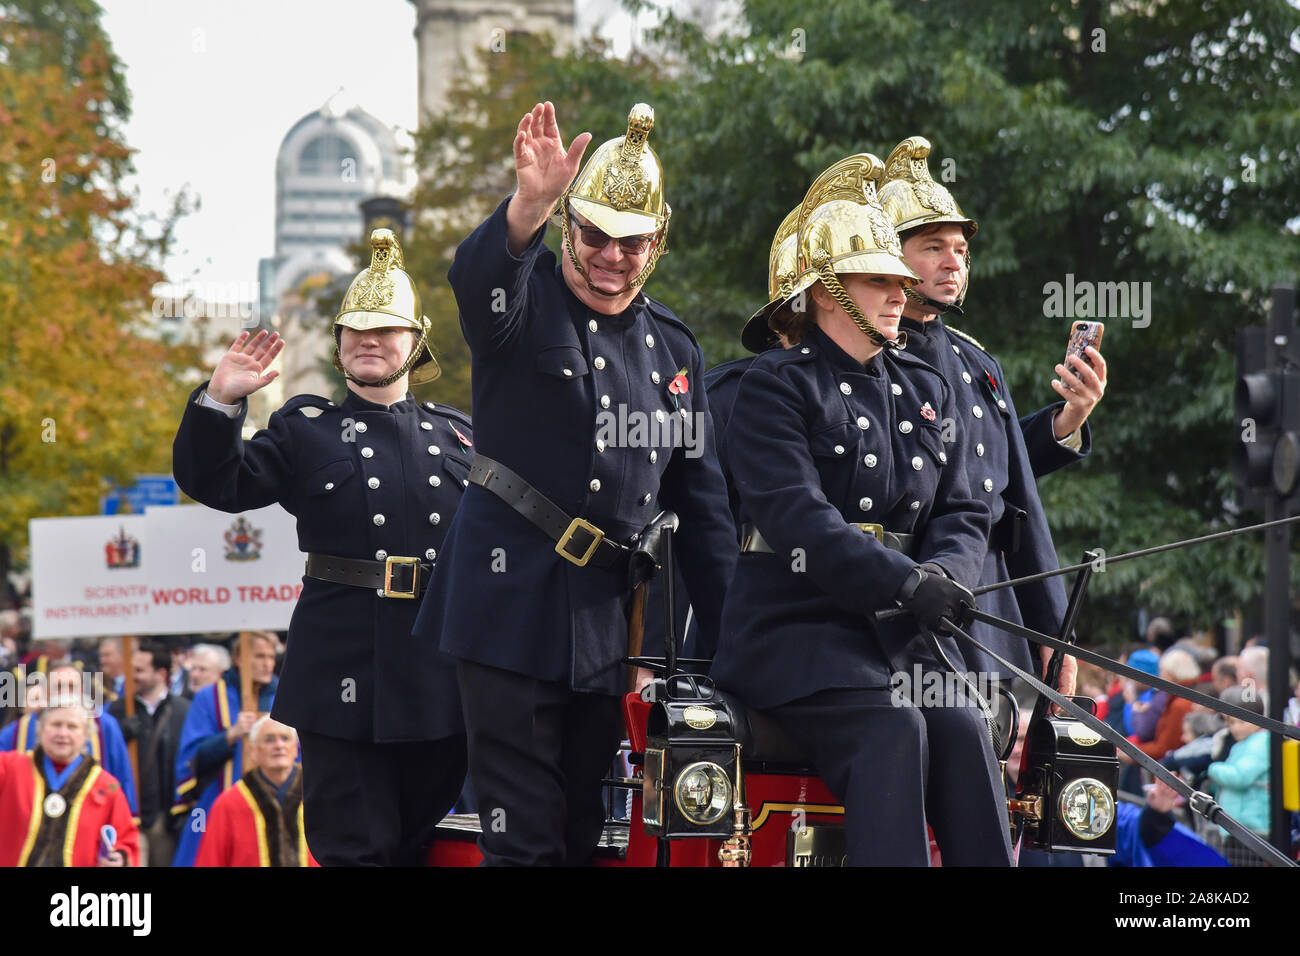 Members of the London Fire Brigade in old uniforms taking part during The Lord Mayor's Show in London.The traditional yearly procession brings together over 6,500 people, 120 horses and over 60 decorated floats in a major spectacle that dates back to the 13th century. It's 3 miles long and travels from Mansion House to the Royal Courts of Justice where the Lord Mayor takes an oath of allegiance to the sovereign before the Lord Chief Justice. Stock Photo